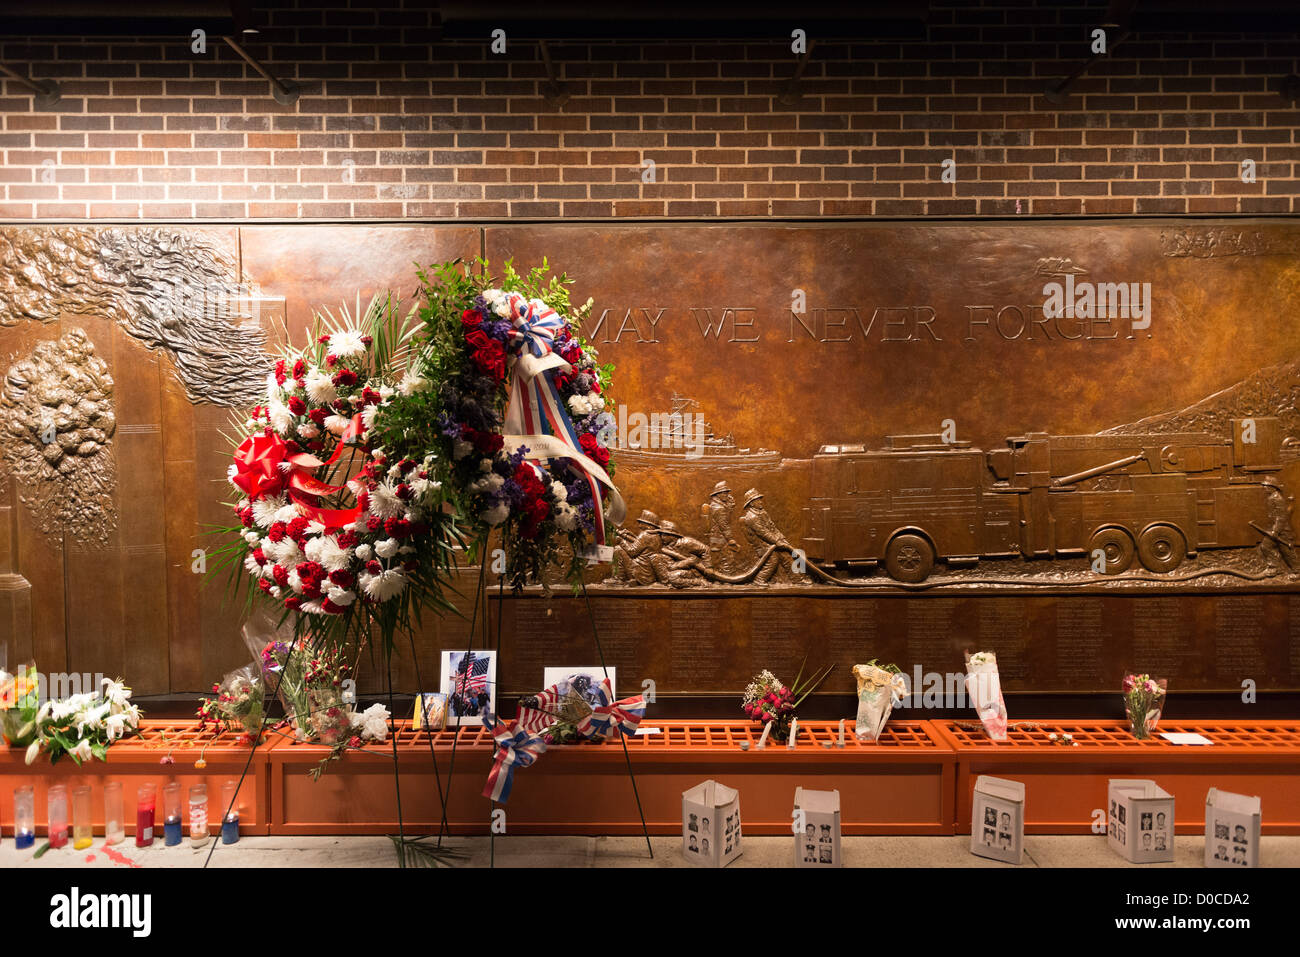 Memorial Wall of the FDNY firefighters Stock Photo